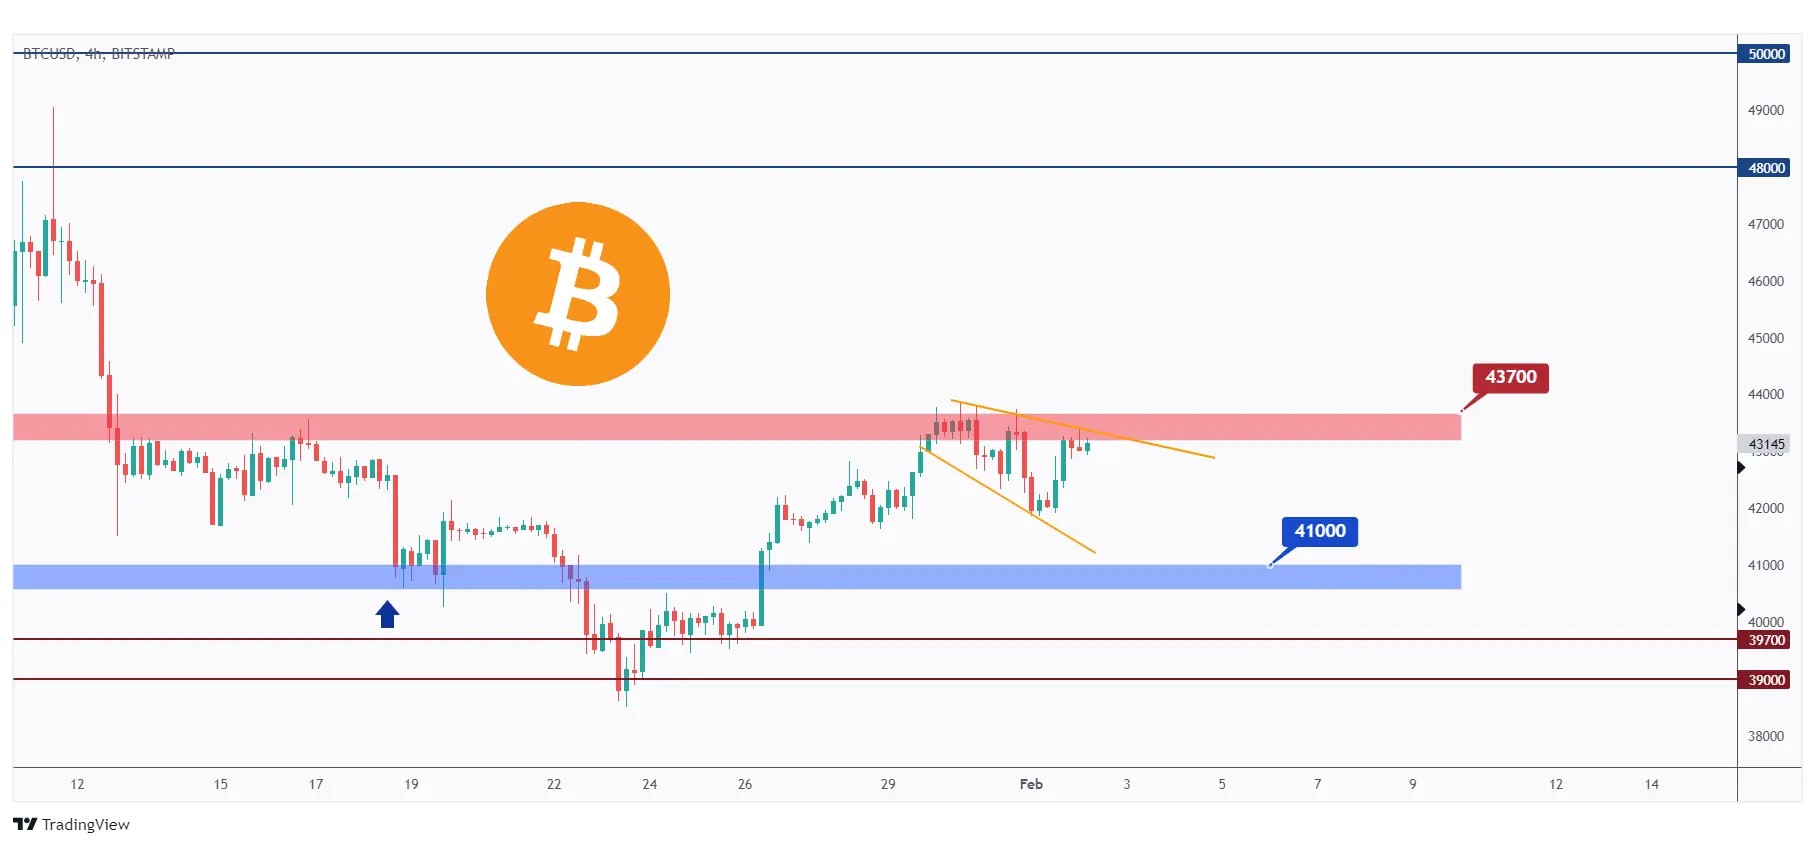 BTC 4h chart showing the overall bearish sentiment inside a wedge pattern around resistance.